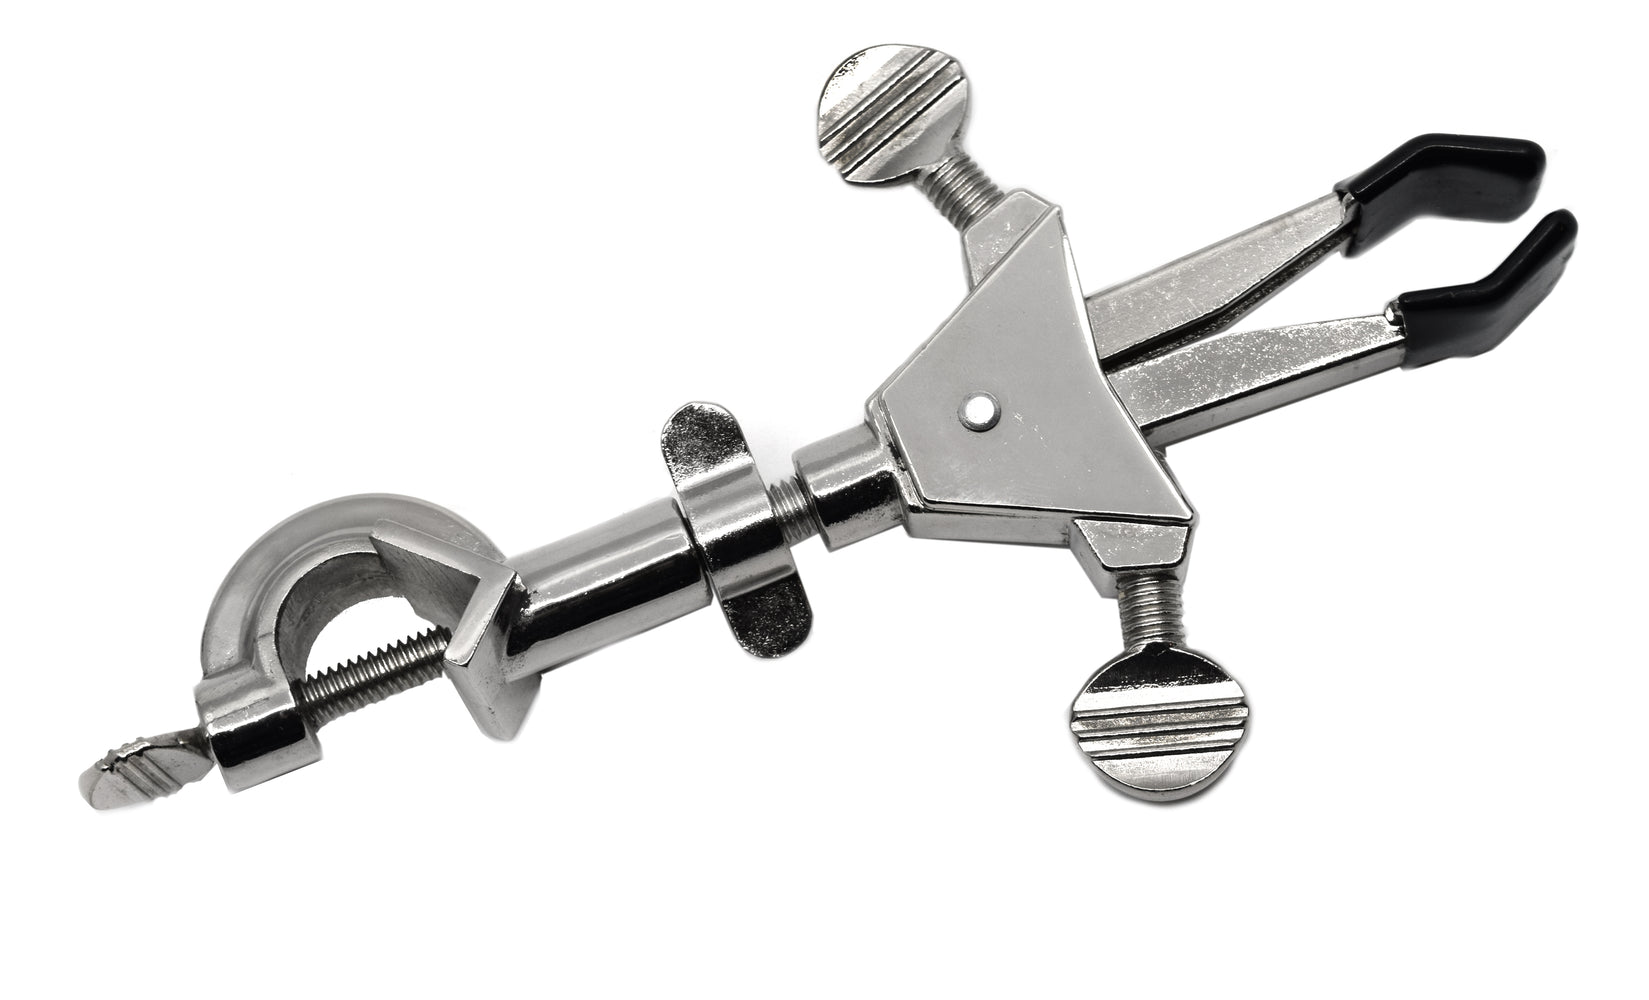 2 Prong Double Adjustable Universal Clamp, Integral Boss Head, Non-Slip Vinyl Coated Rubber Jaws, 7.5"-8" Adjustable Length - Eisco Labs